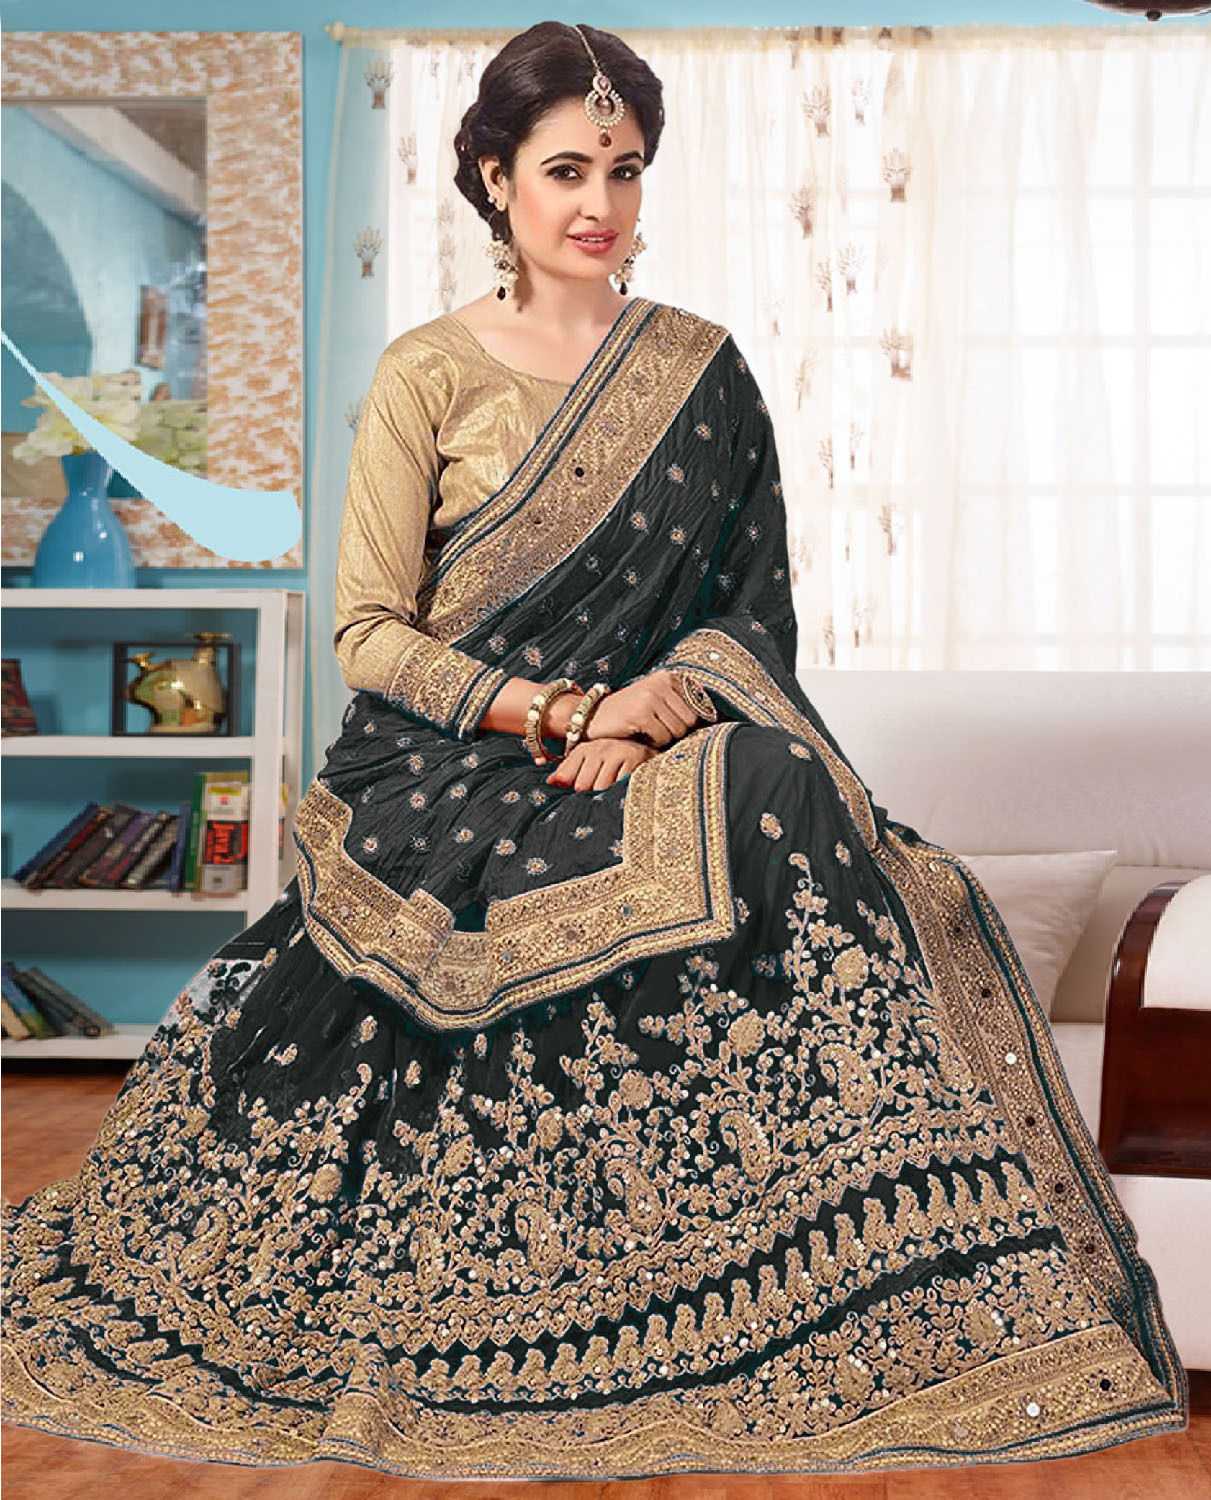 Exlclusive   Designer Embrodery  Vichitra  with net  Silk saree